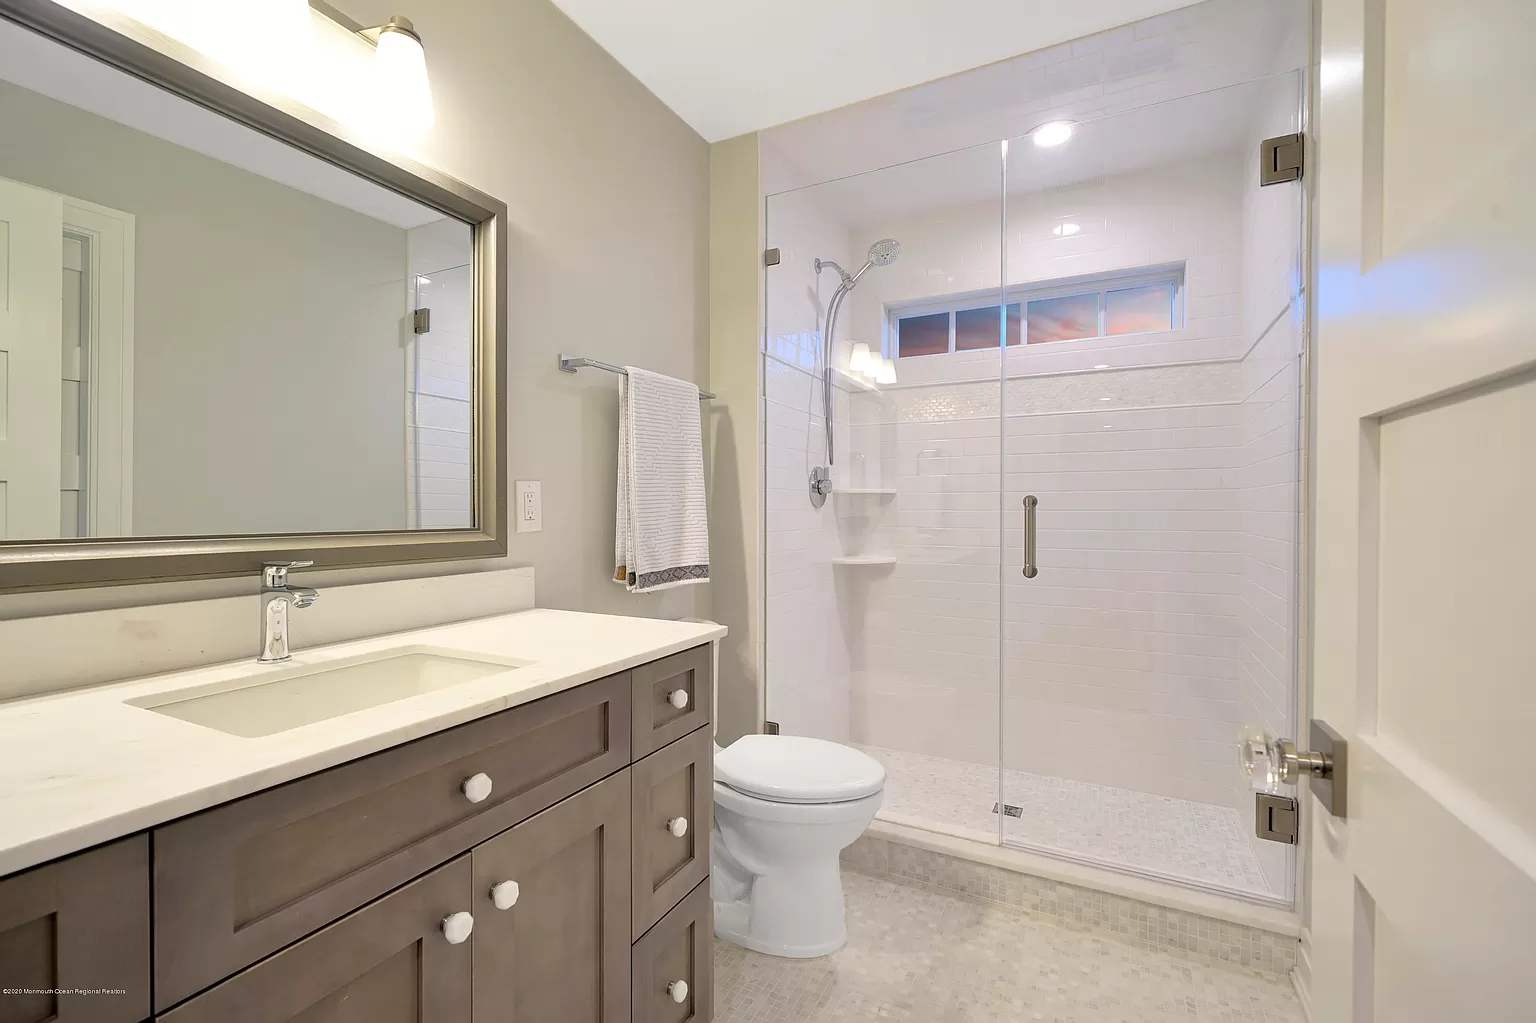 Cheap Bathroom Remodel | Pictures Designs Ideas